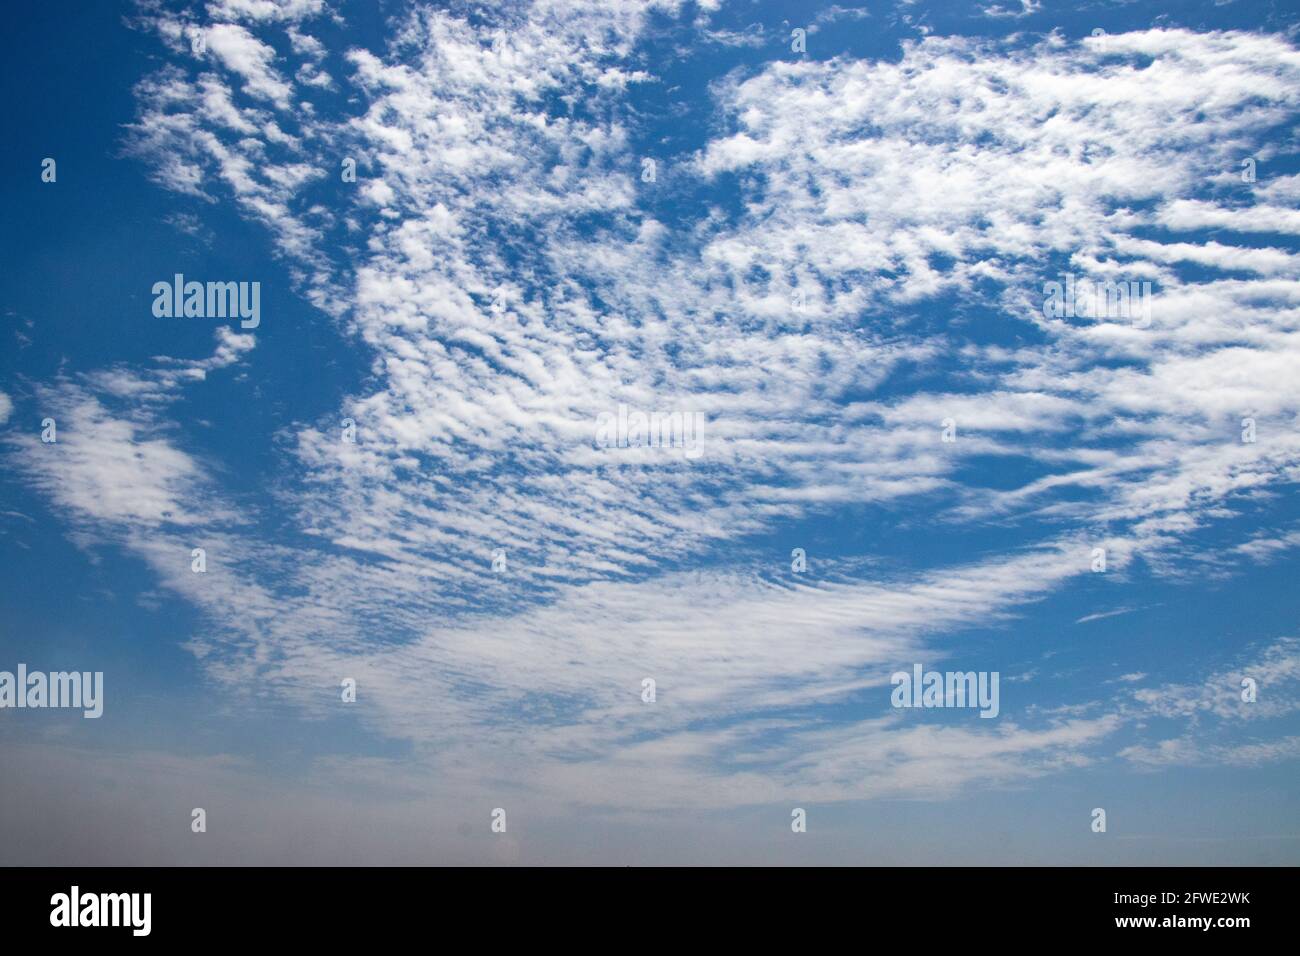 Dramatic Sky Background. Clouds in blue Sky. Moody Cloudscape. Panoramic Image Can Be Used as Web Banner Stock Photo